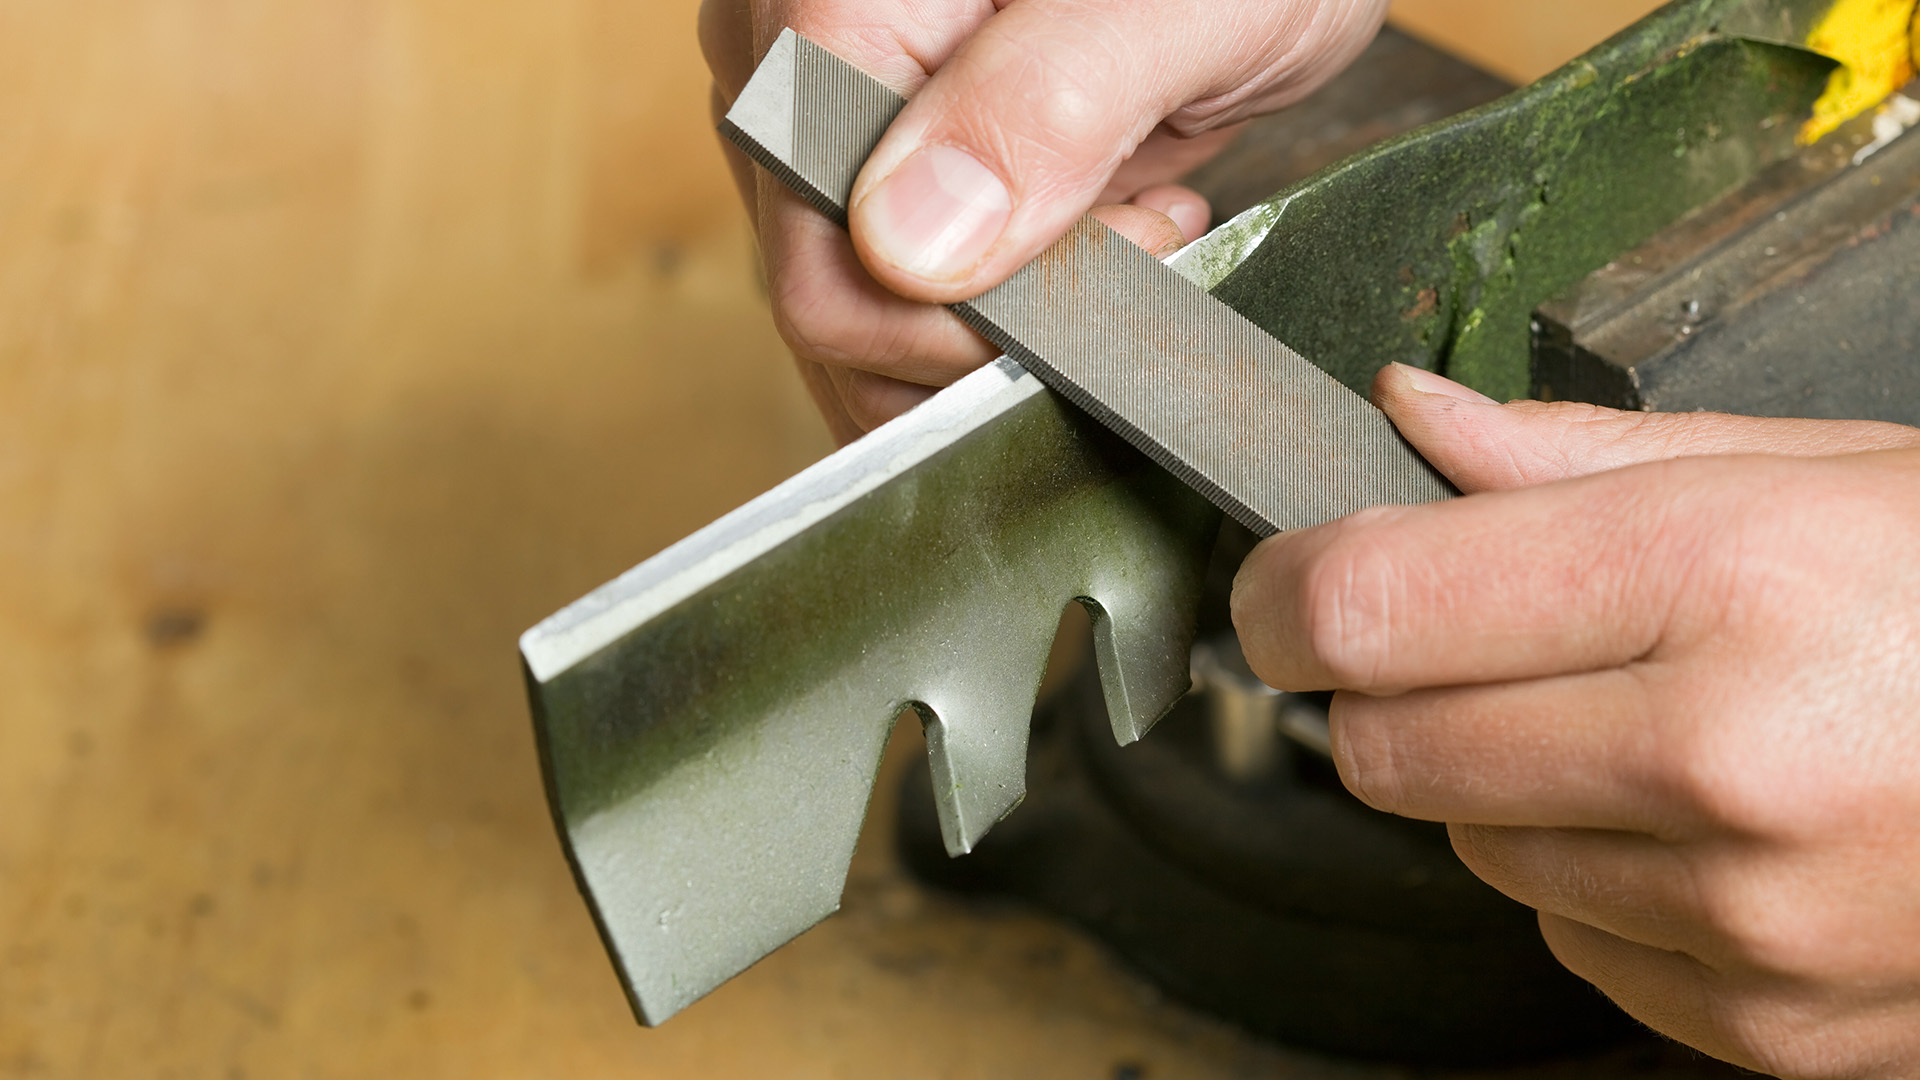 Try these tools to sharpen lawn mower blades